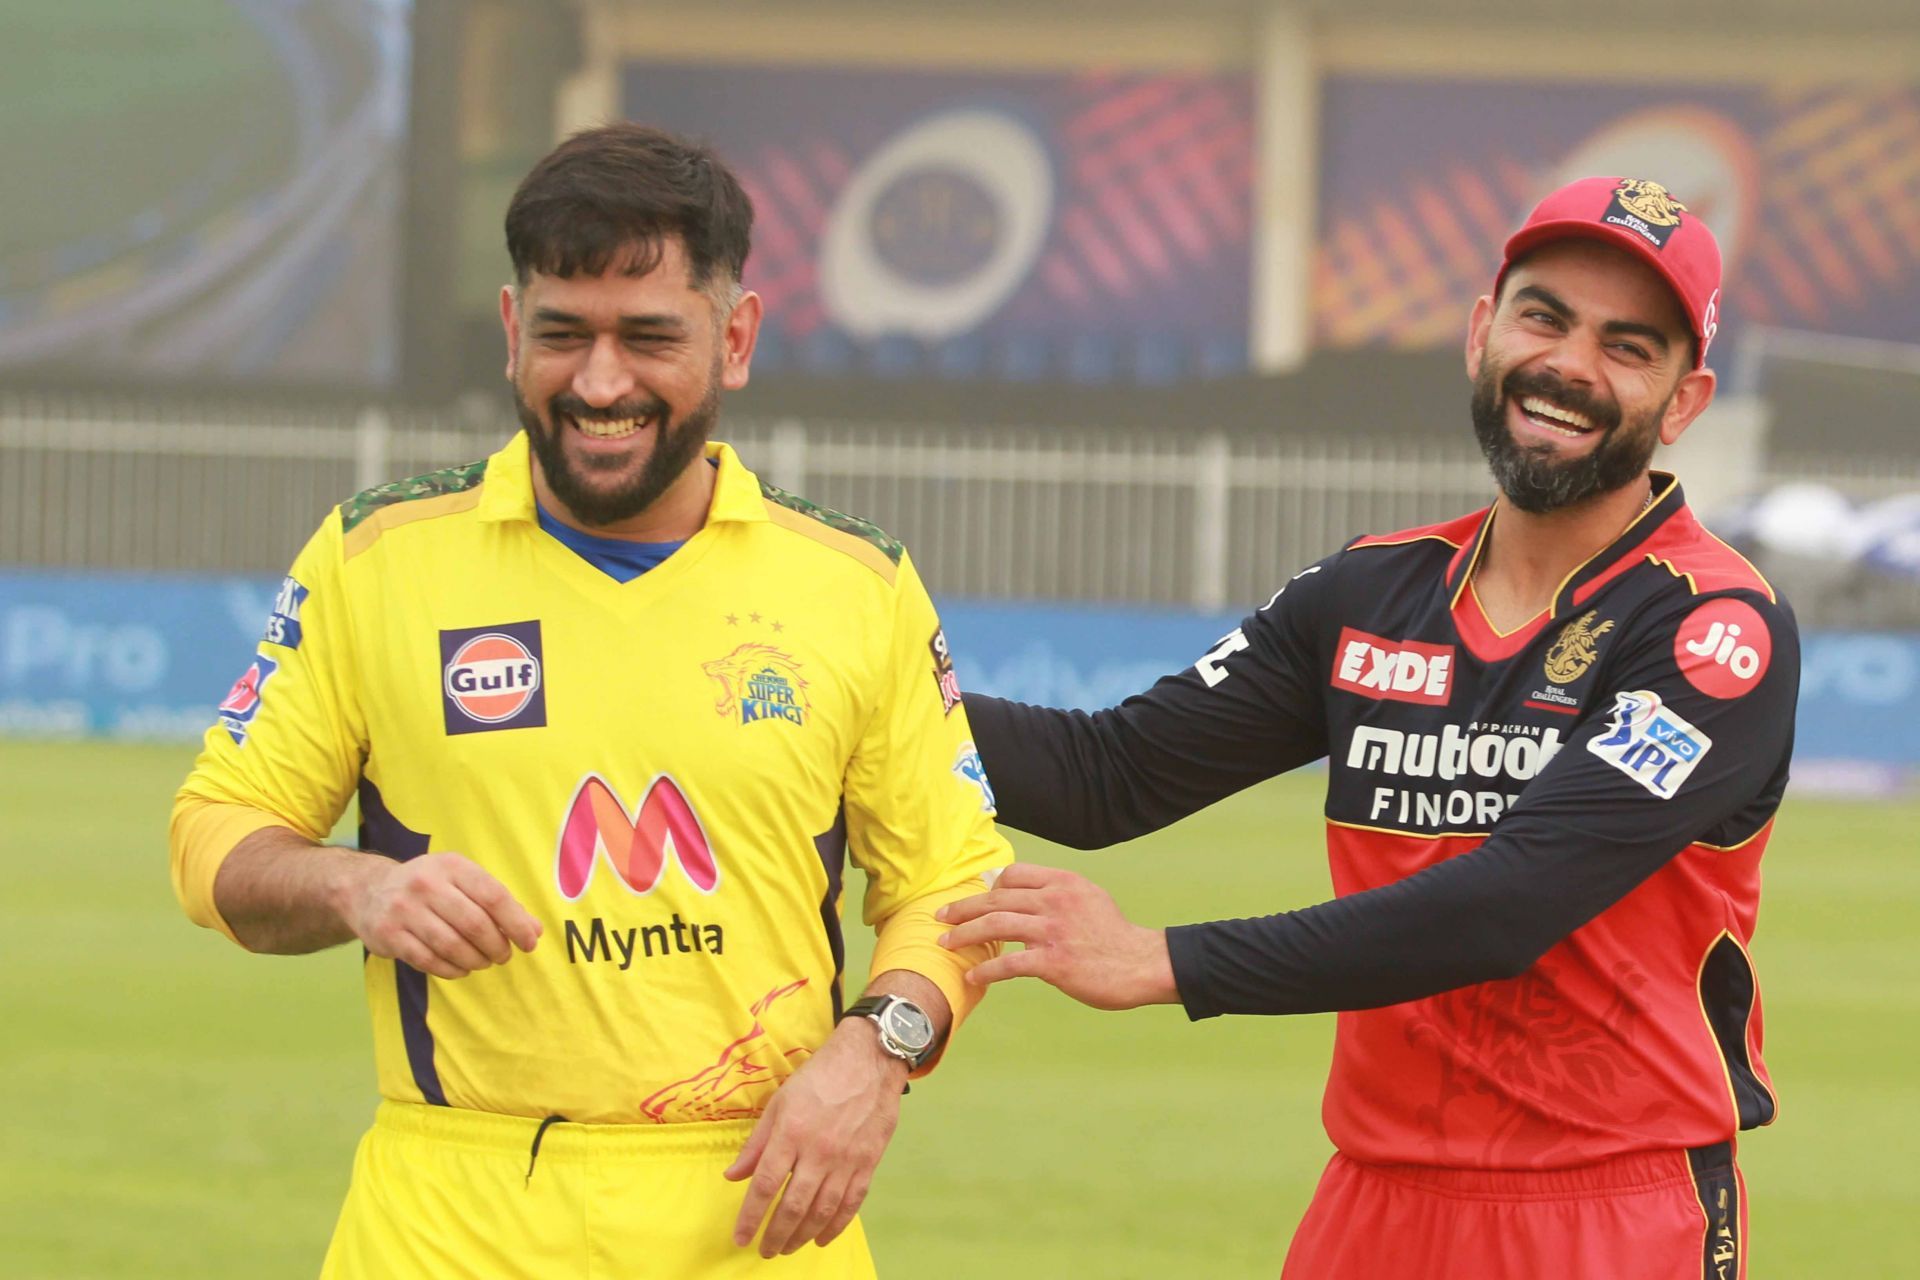 Both MS Dhoni and Virat Kohli have accepted a lower salary from their teams ahead of IPL Auction 2022 (Image Courtesy: IPLT20.com)